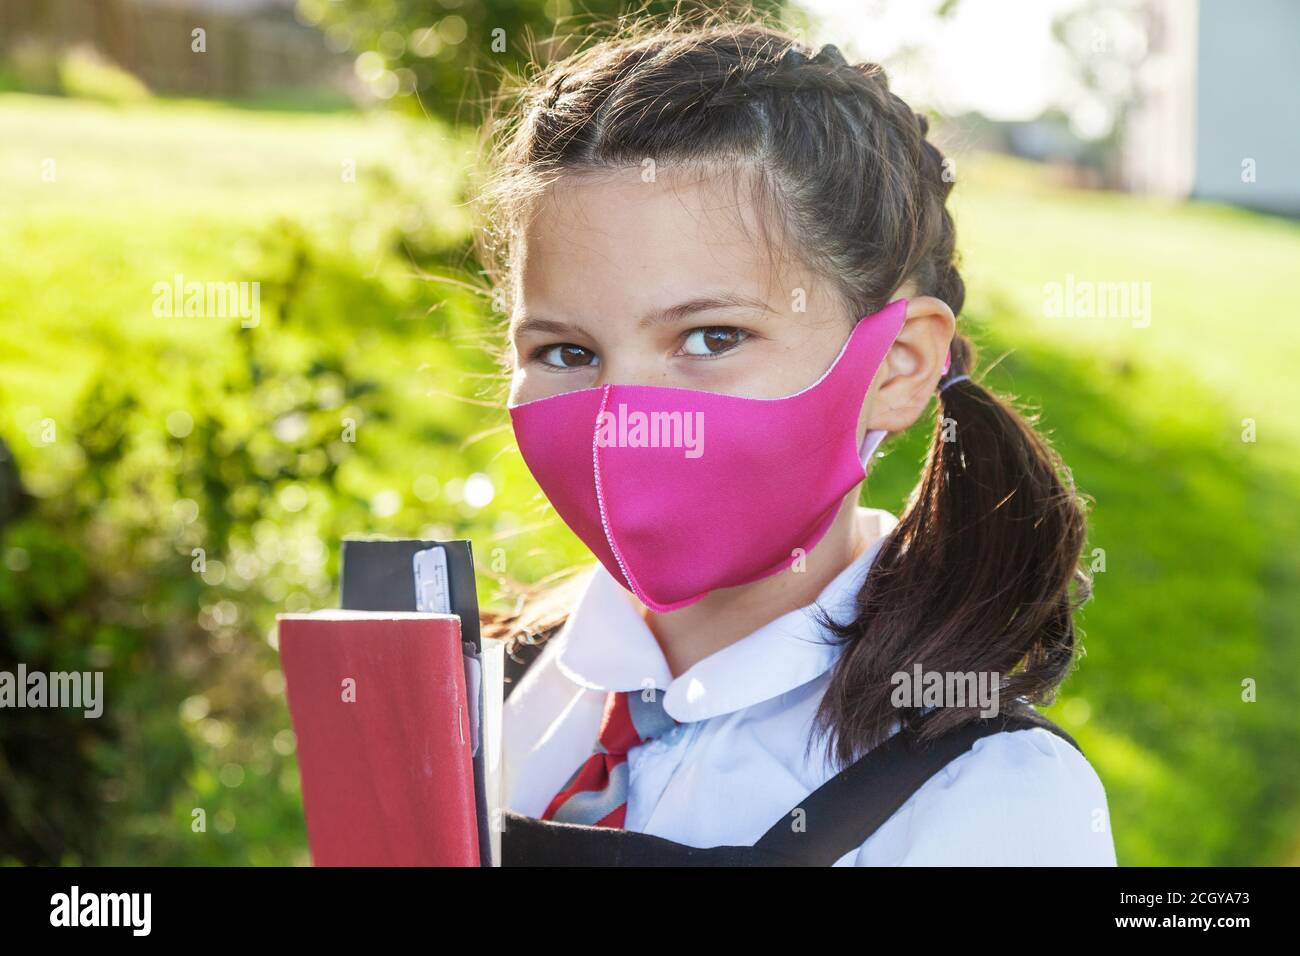 Close up of the face of a 10 year old girl with her hair in braids and wearing a pink face mask. Stock Photo